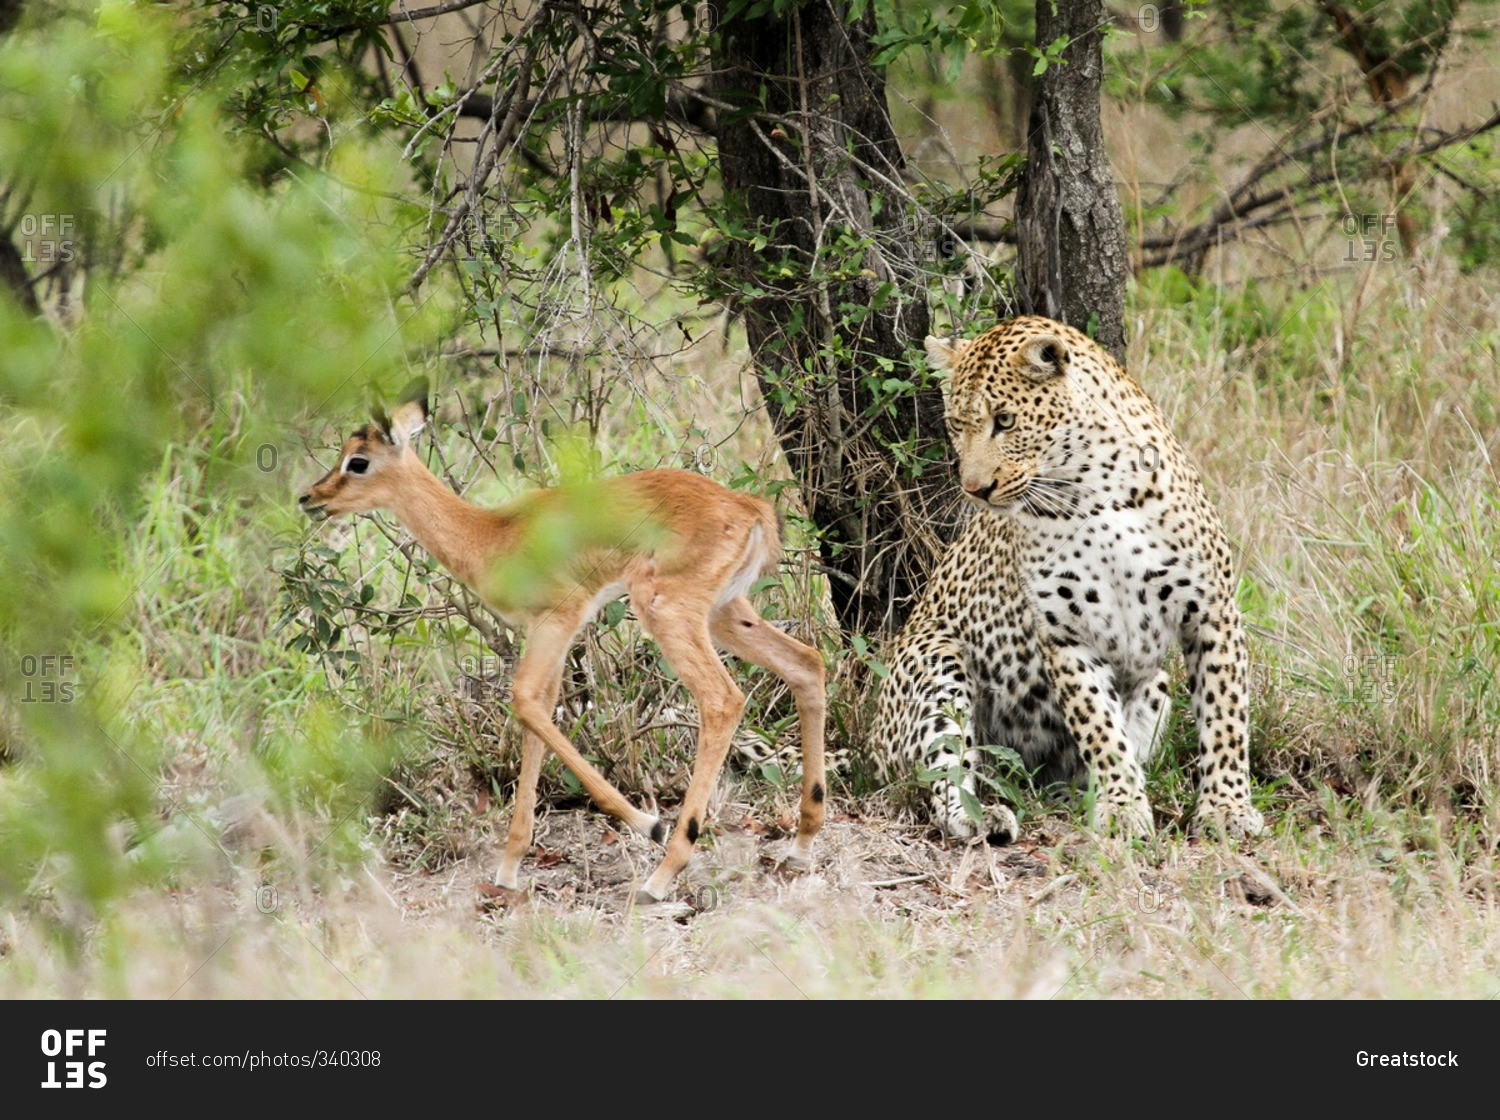 A leopard and impala relaxing in the Kruger National Park in South Africa